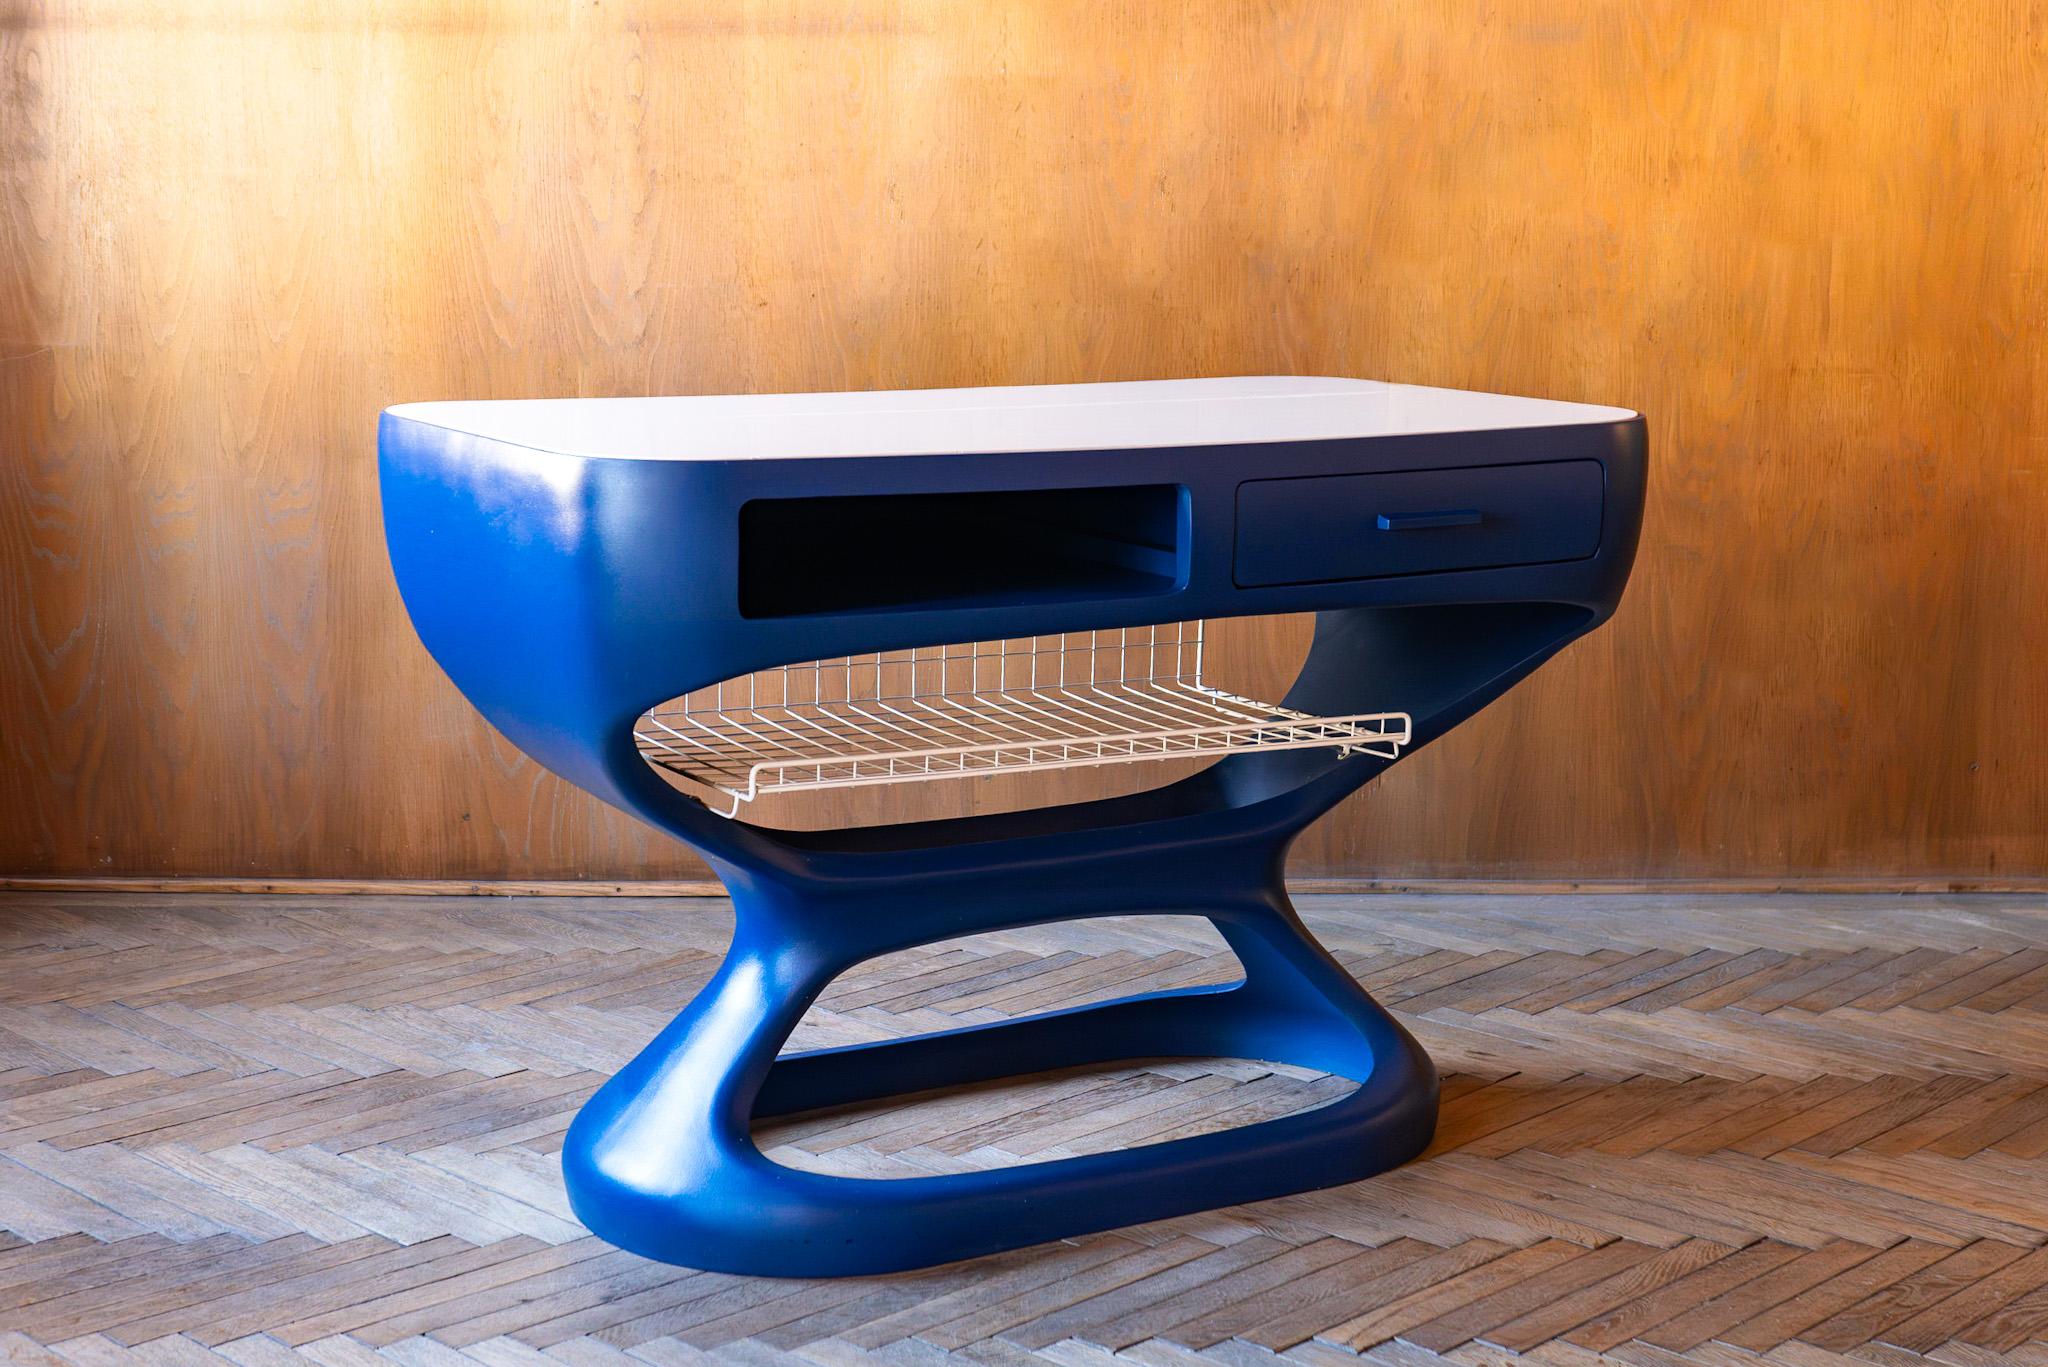 Space Age Blue White Fiberglass Desk in the Manner of Luigi Colani, Italy 70s.

This rare space-age desk seamlessly blends retro-futurism with artistic expression. This extraordinary writing table, reminiscent of the iconic style of Luigi Colani, is